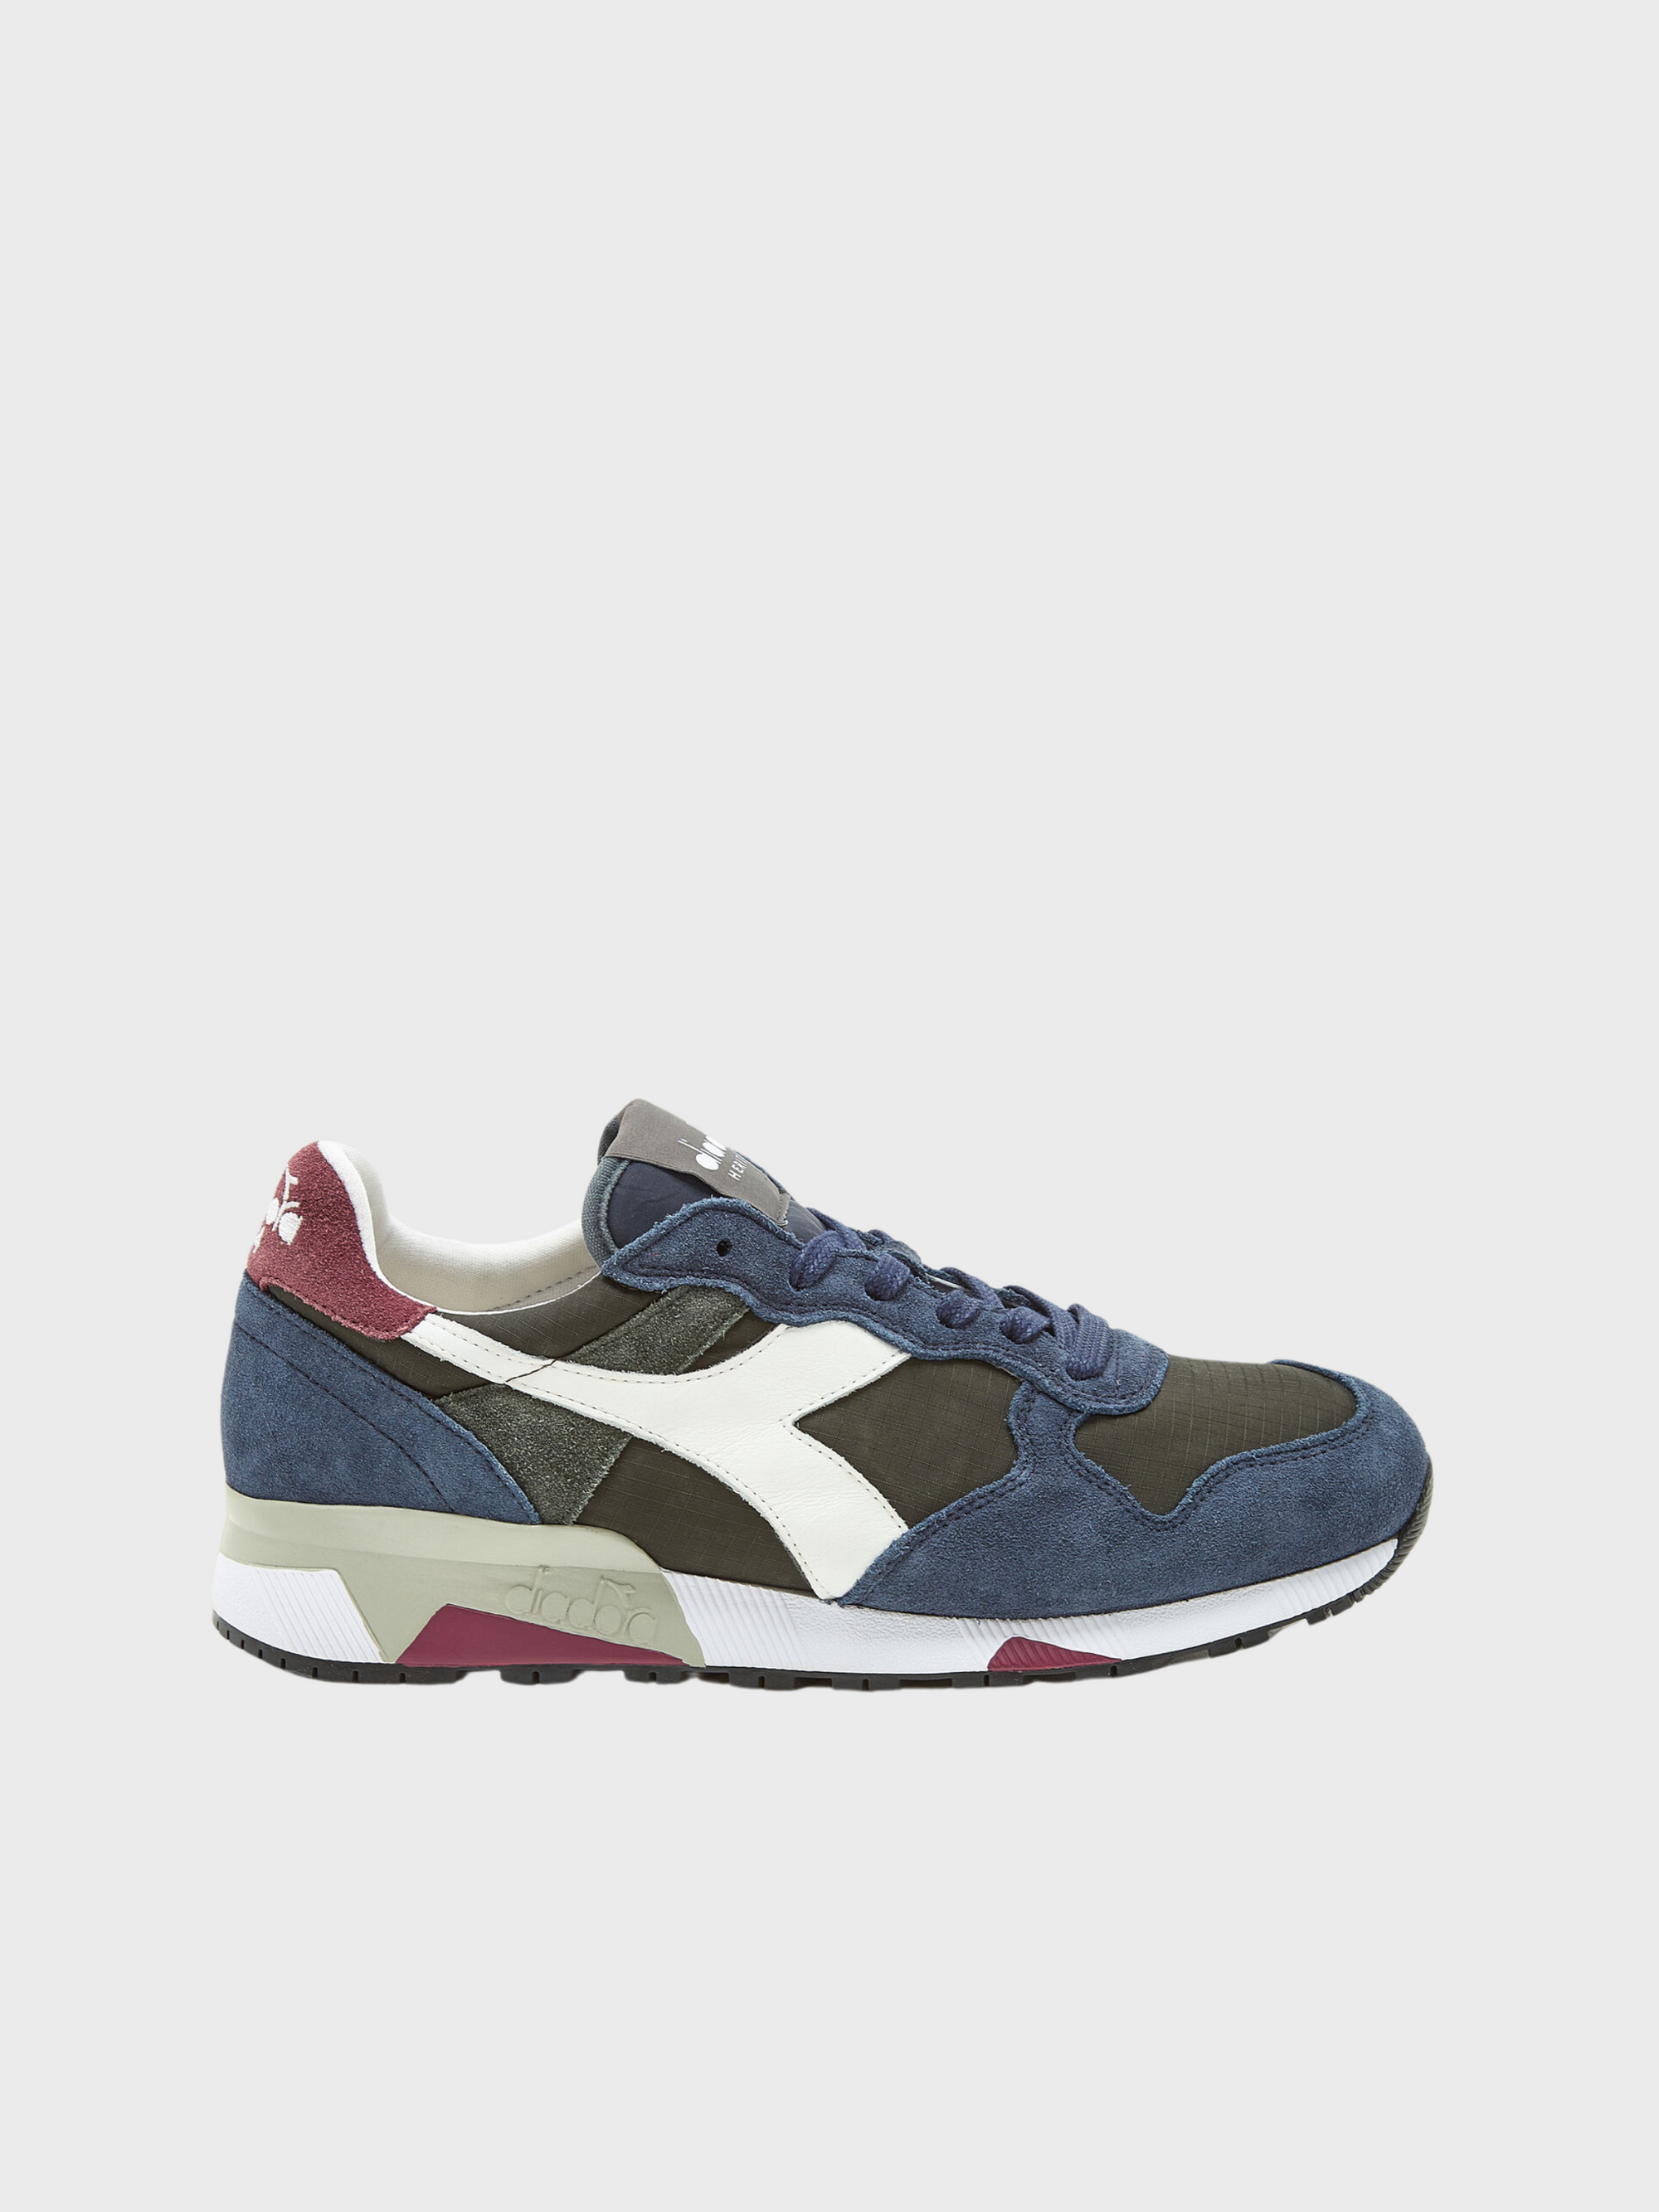 Diadora - Trident 90 Ripstop Sneaker - Forest Night-Men's Sneakers-8-Yaletown-Vancouver-Surrey-Canada